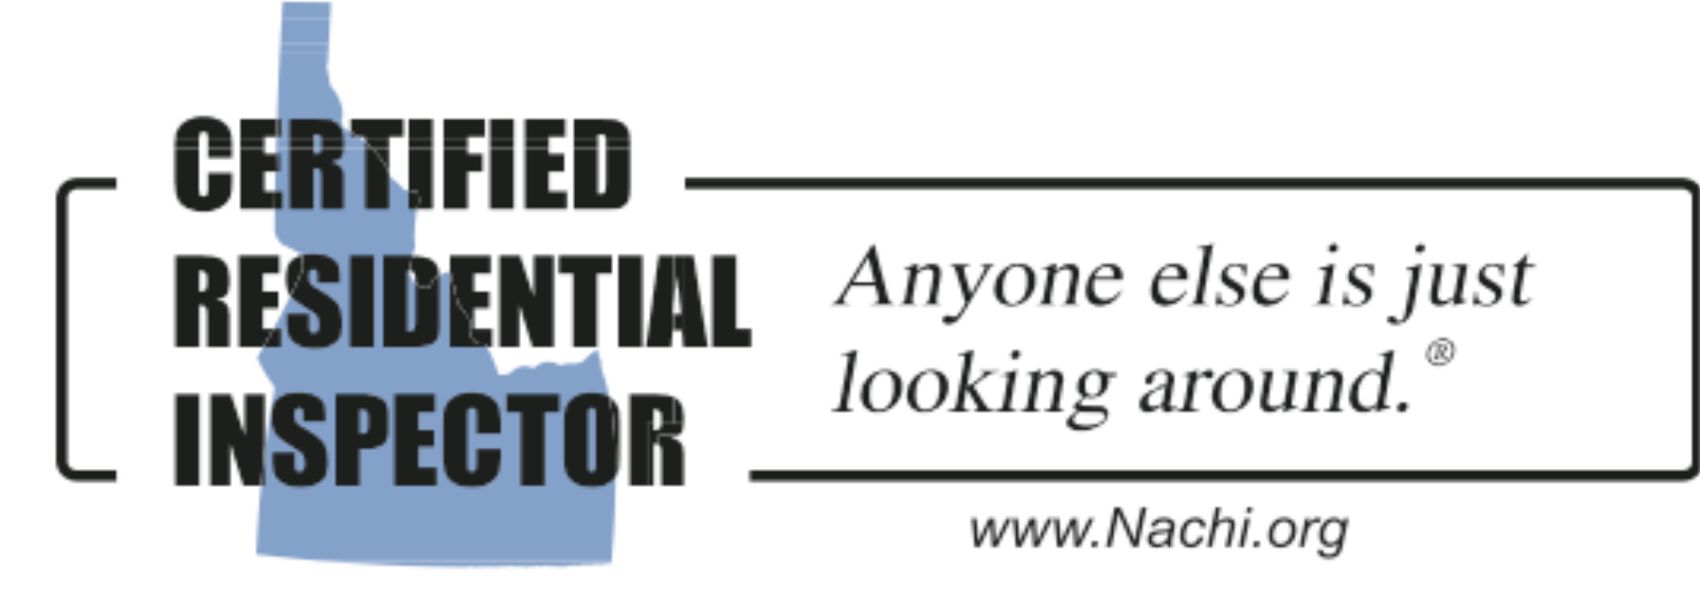 Certified by the National Association of Certified Home Inspectors - 
Click here to verify.